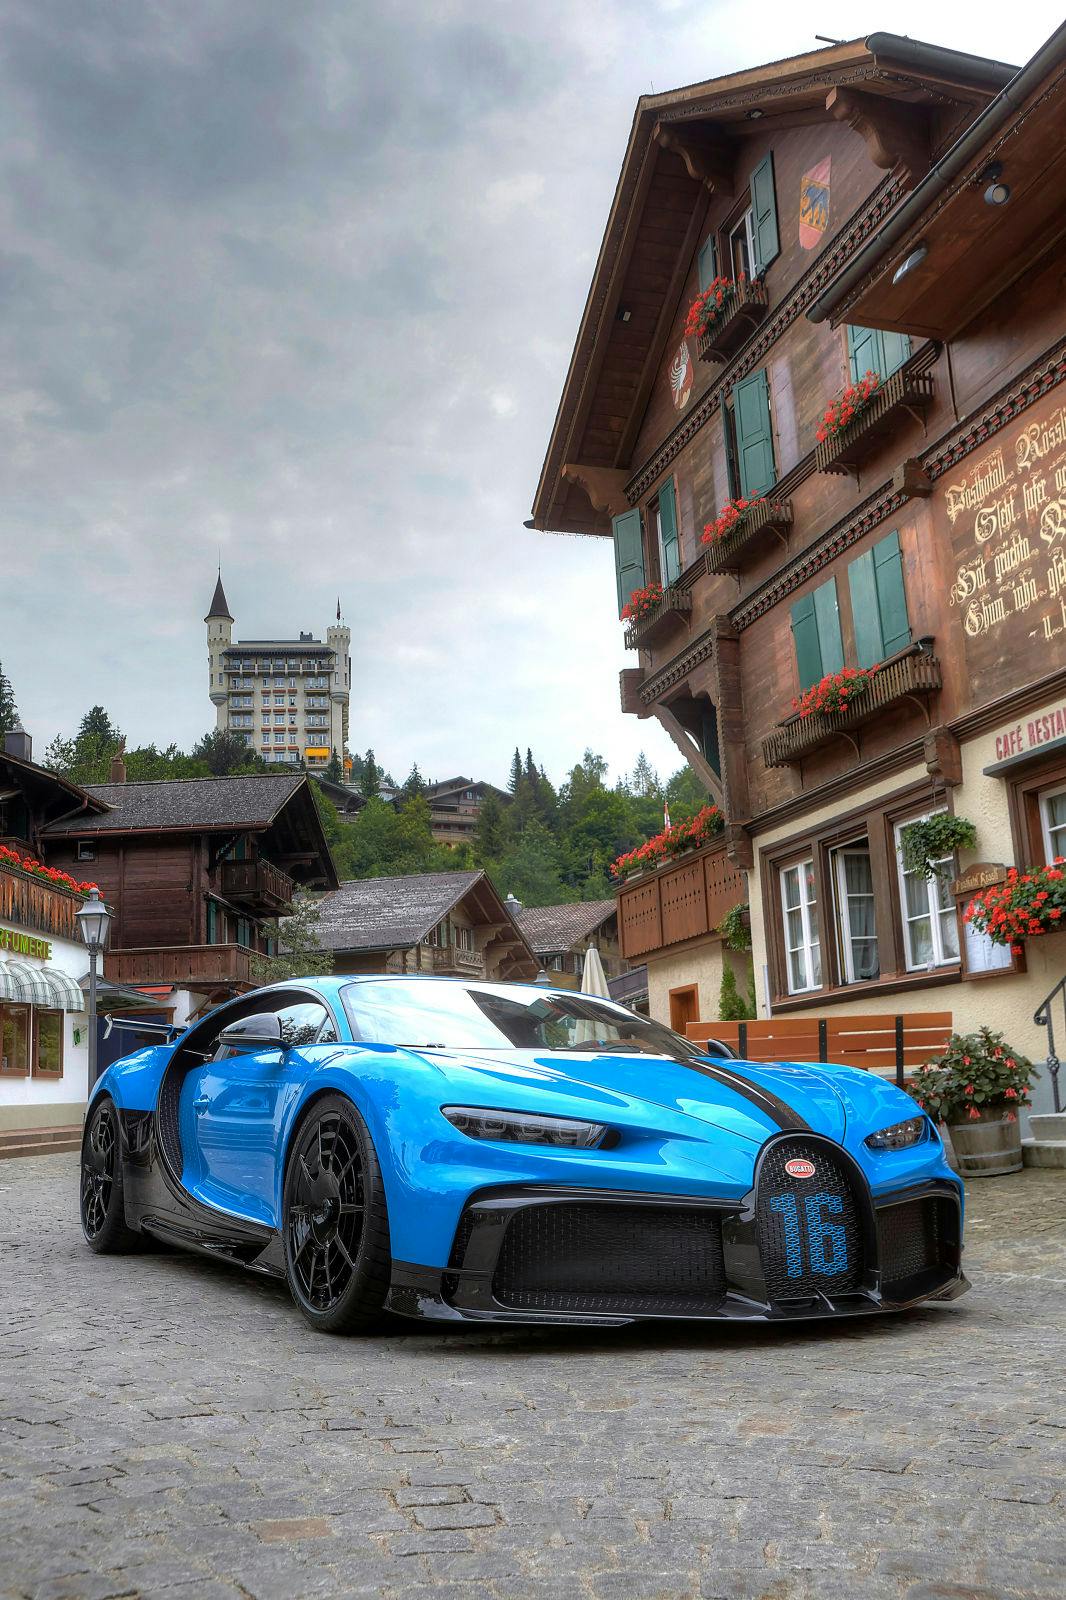 The new Chiron Pur Sport in Gstaad, Switzerland.